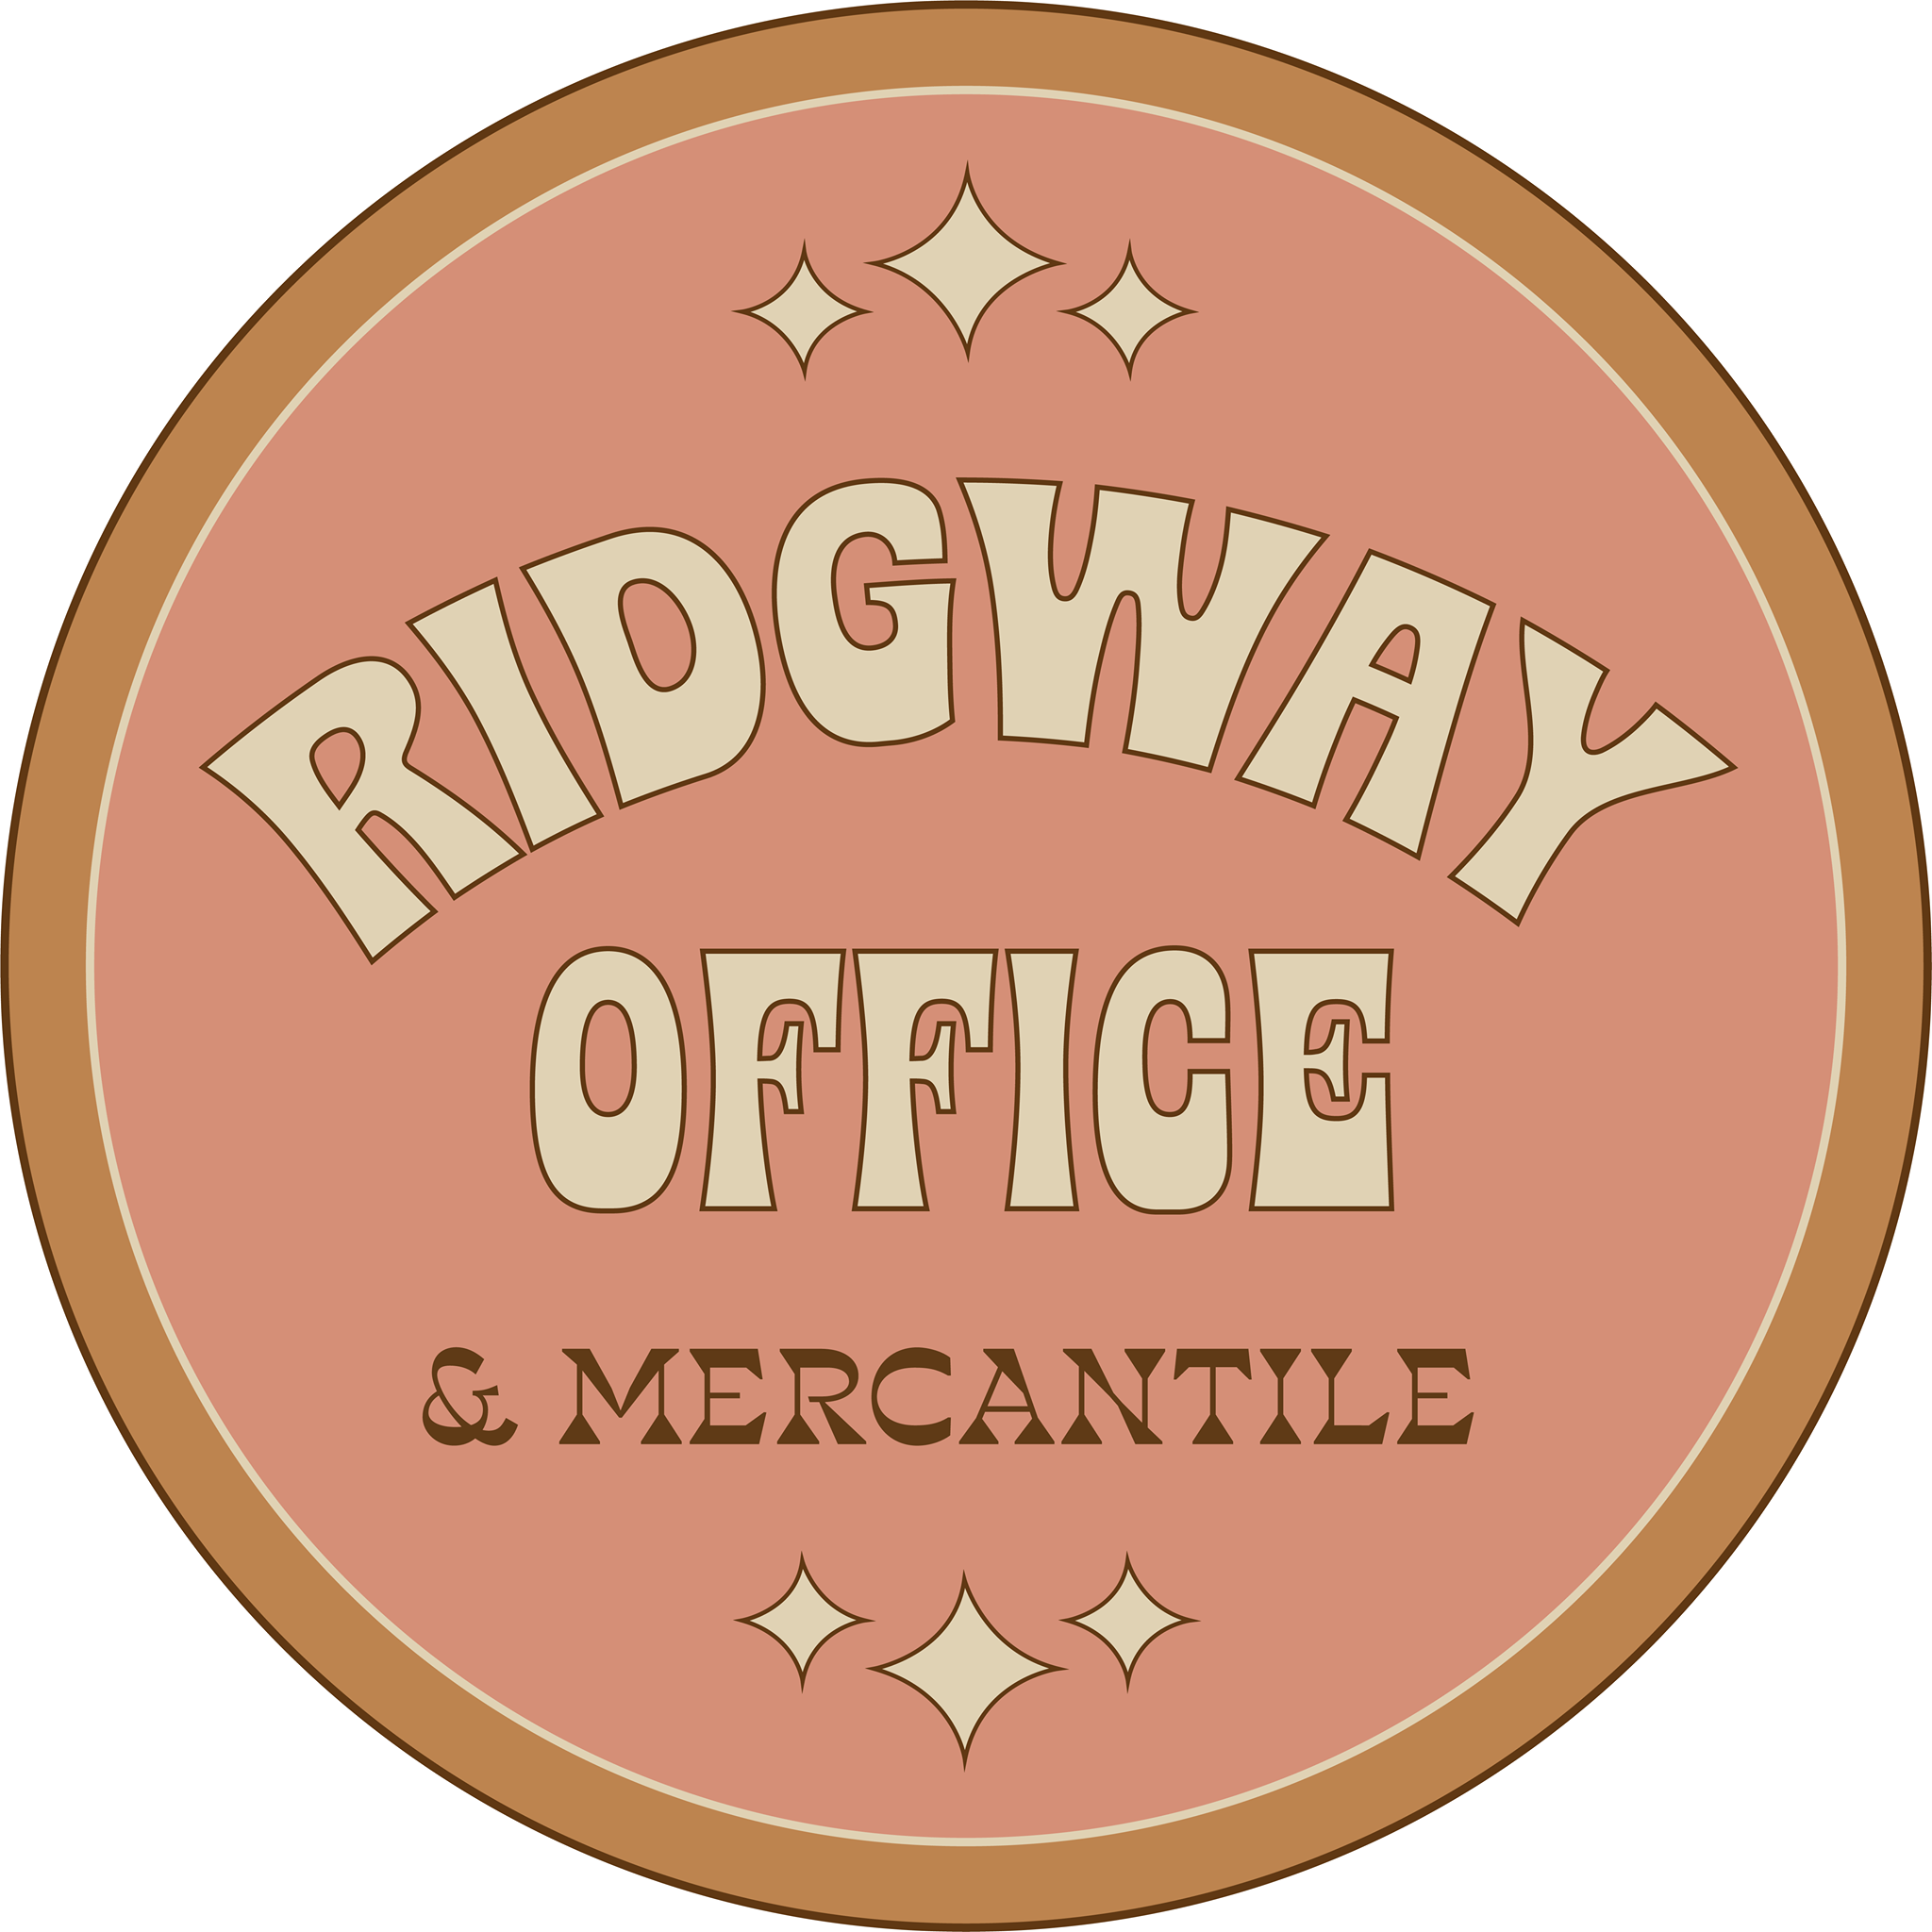 Ridgway Office and Mercantile